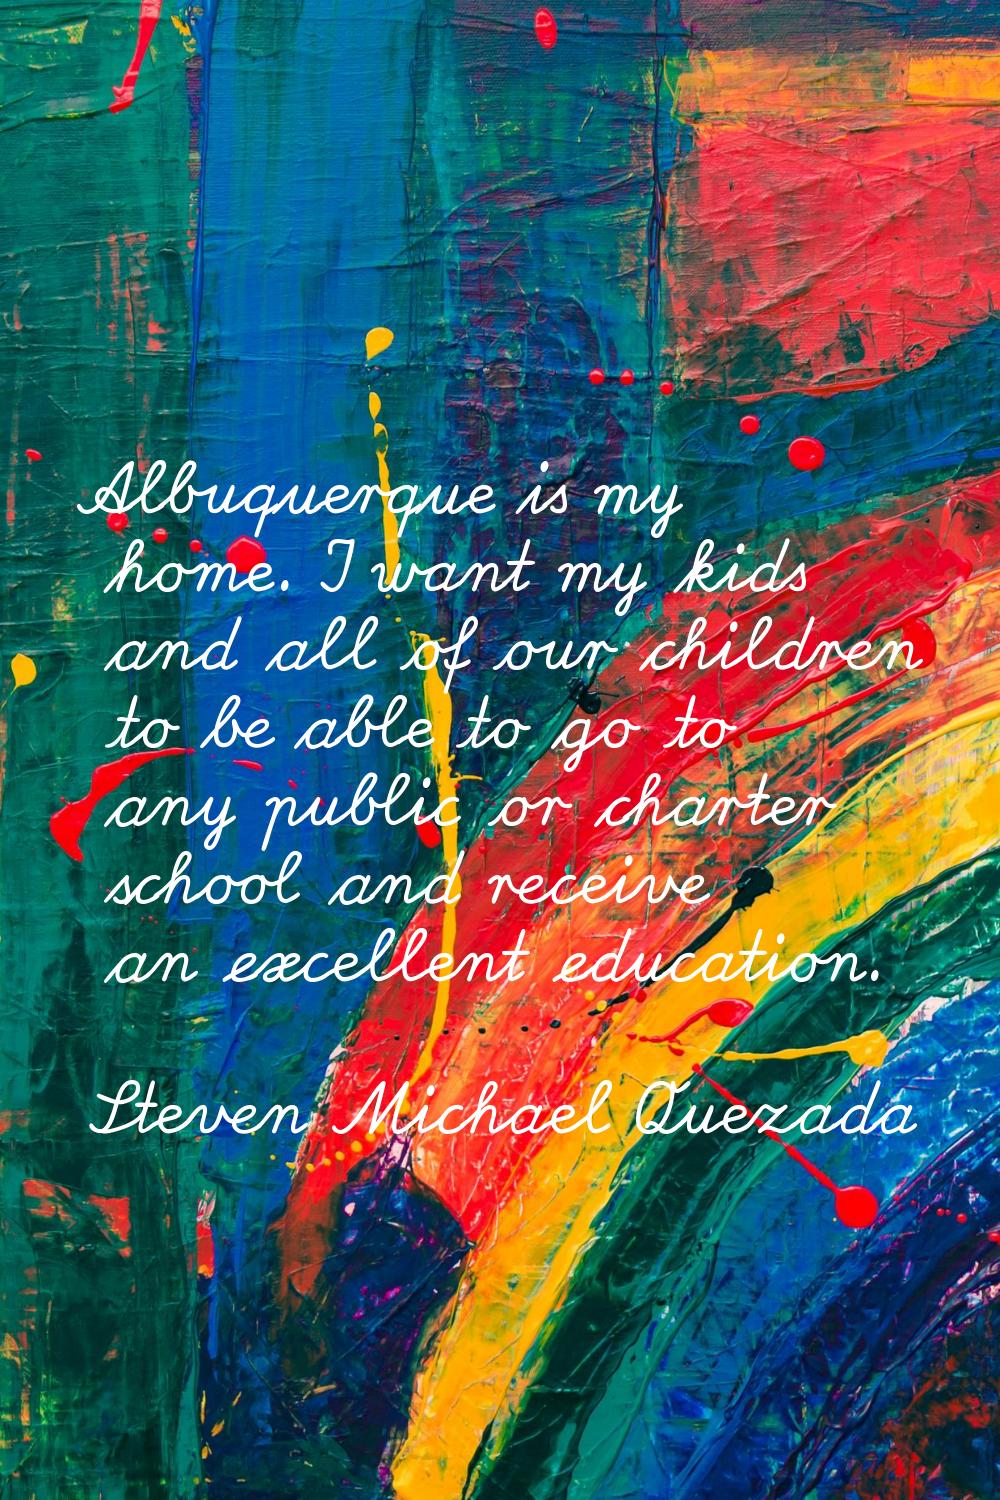 Albuquerque is my home. I want my kids and all of our children to be able to go to any public or ch